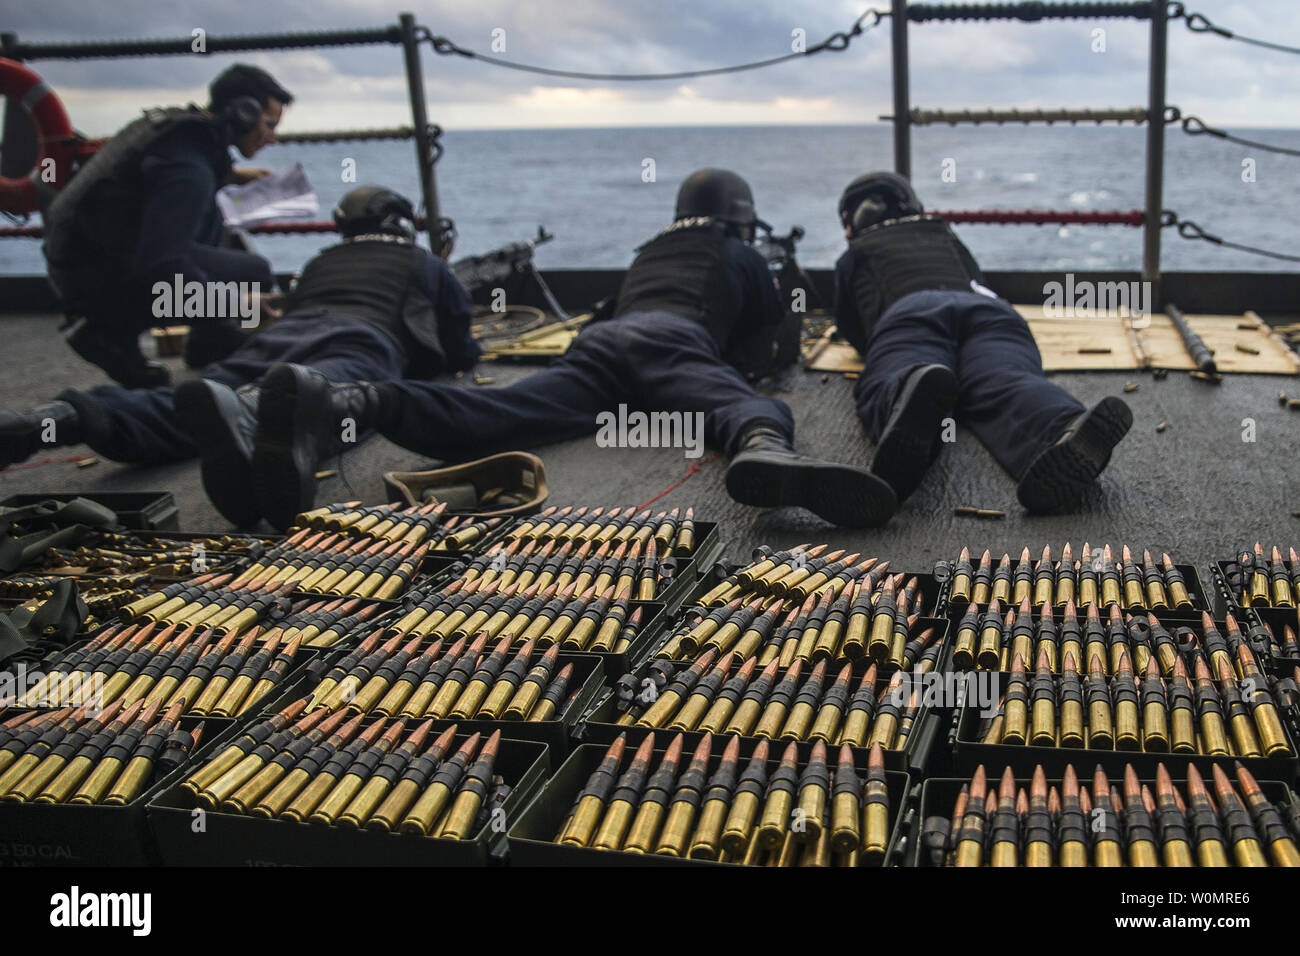 Sailors participate in a live-fire exercise on the fantail of the aircraft carrier USS George Washington (CVN 73) on December 15, 2016. George Washington, homeported in Norfolk, is underway conducting carrier qualifications in the Atlantic Ocean. Photo by Clemente A. Lynch//U.S. Navy/UPI Stock Photo